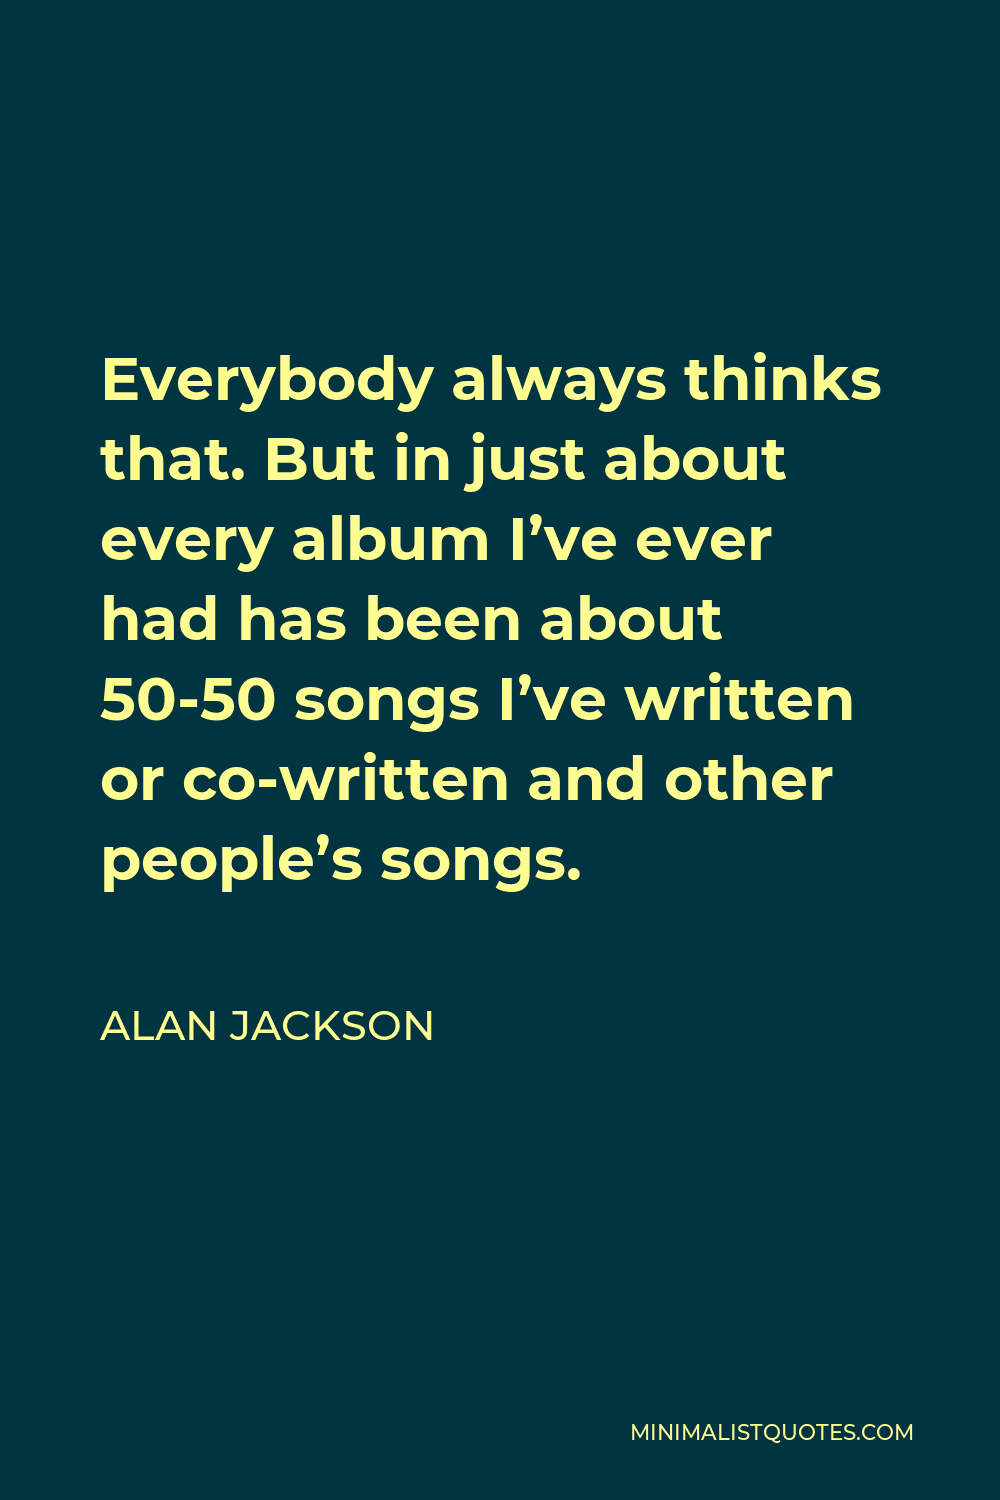 Alan Jackson Quote - Everybody always thinks that. But in just about every album I’ve ever had has been about 50-50 songs I’ve written or co-written and other people’s songs.